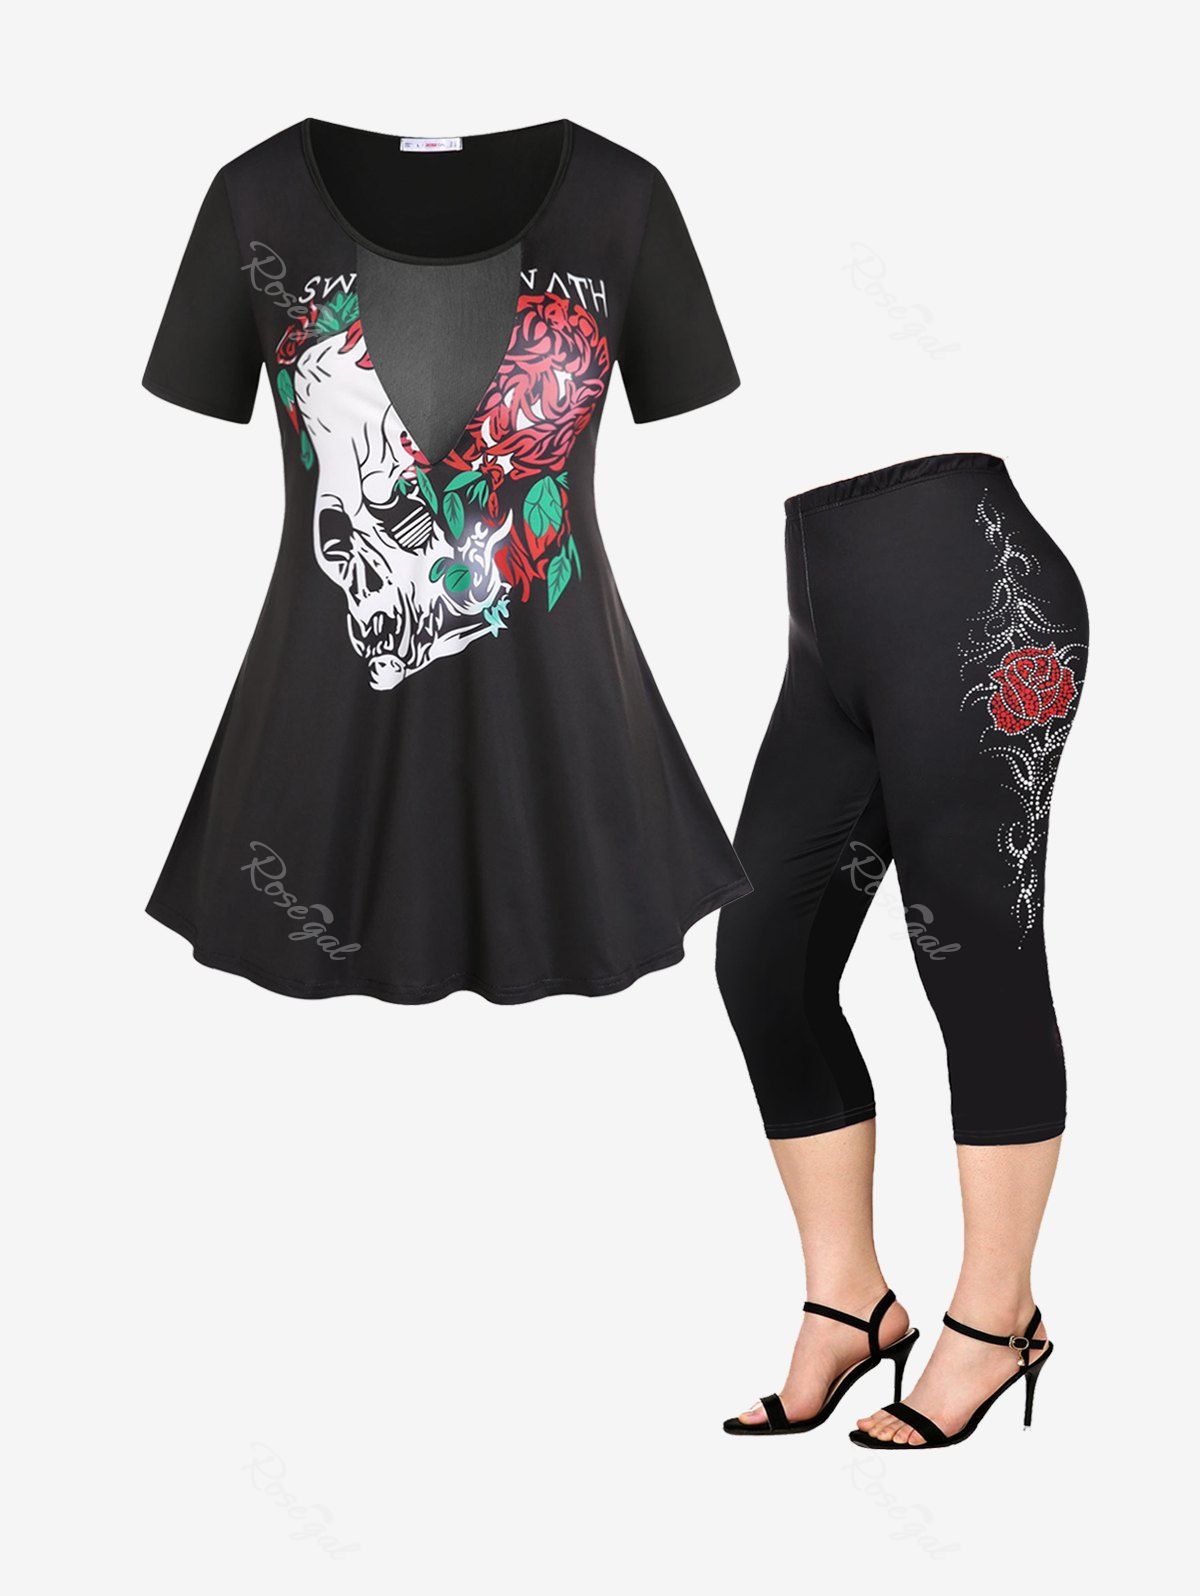 Latest Mesh Panel Gothic Skulls Rose Graphic Tee and Leggings Plus Size Summer Outfit  